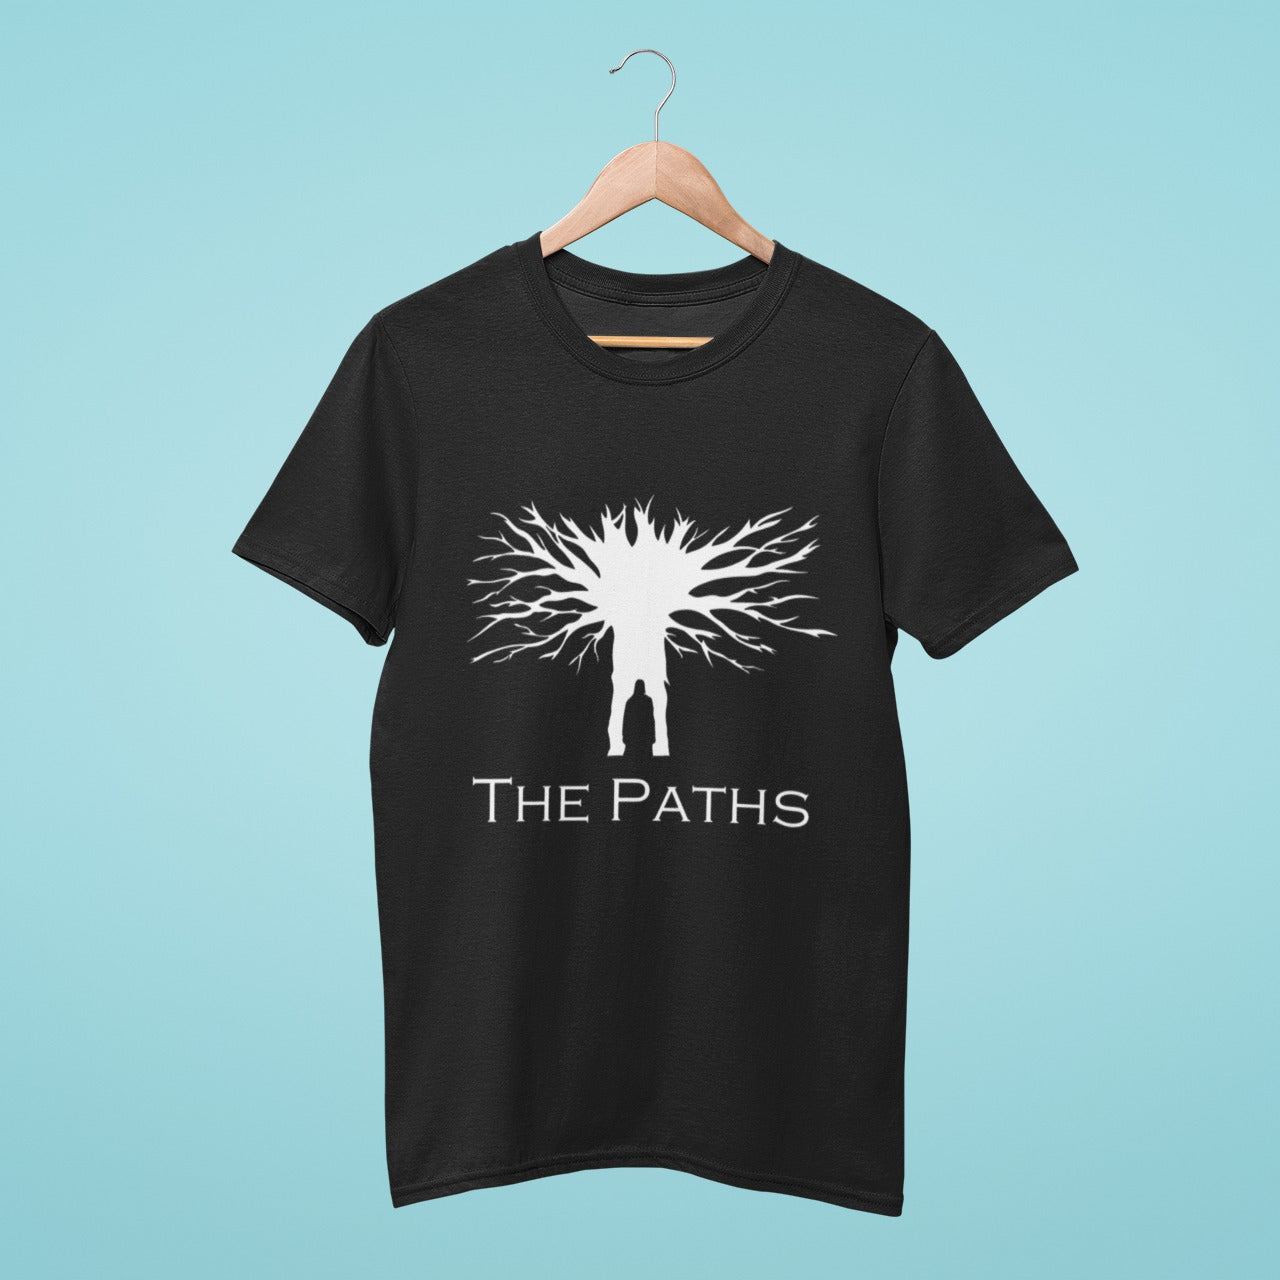 Upgrade your wardrobe with our black t-shirt featuring "The Paths" silhouette from Attack on Titan anime! Made with high-quality materials for comfort and durability, this shirt is perfect for any fan of the series. Order now and show off your style!